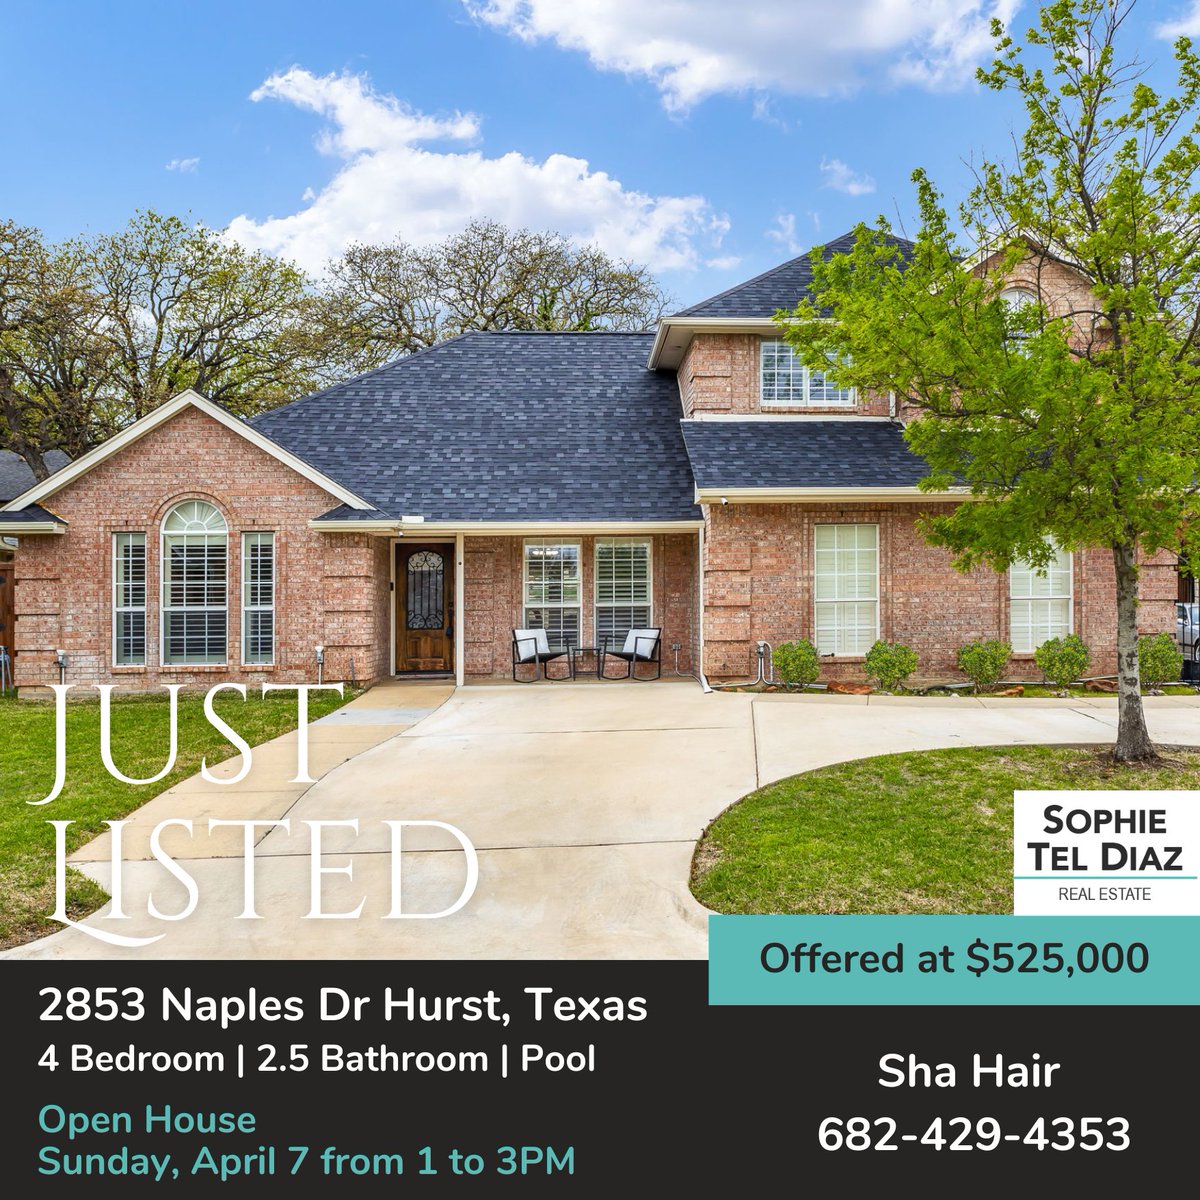 For Sale at 2853 Naples Drive, Hurst, Texas - 4 Bedroom and Pool youtu.be/FpEIGmH8J38?si… via @YouTube